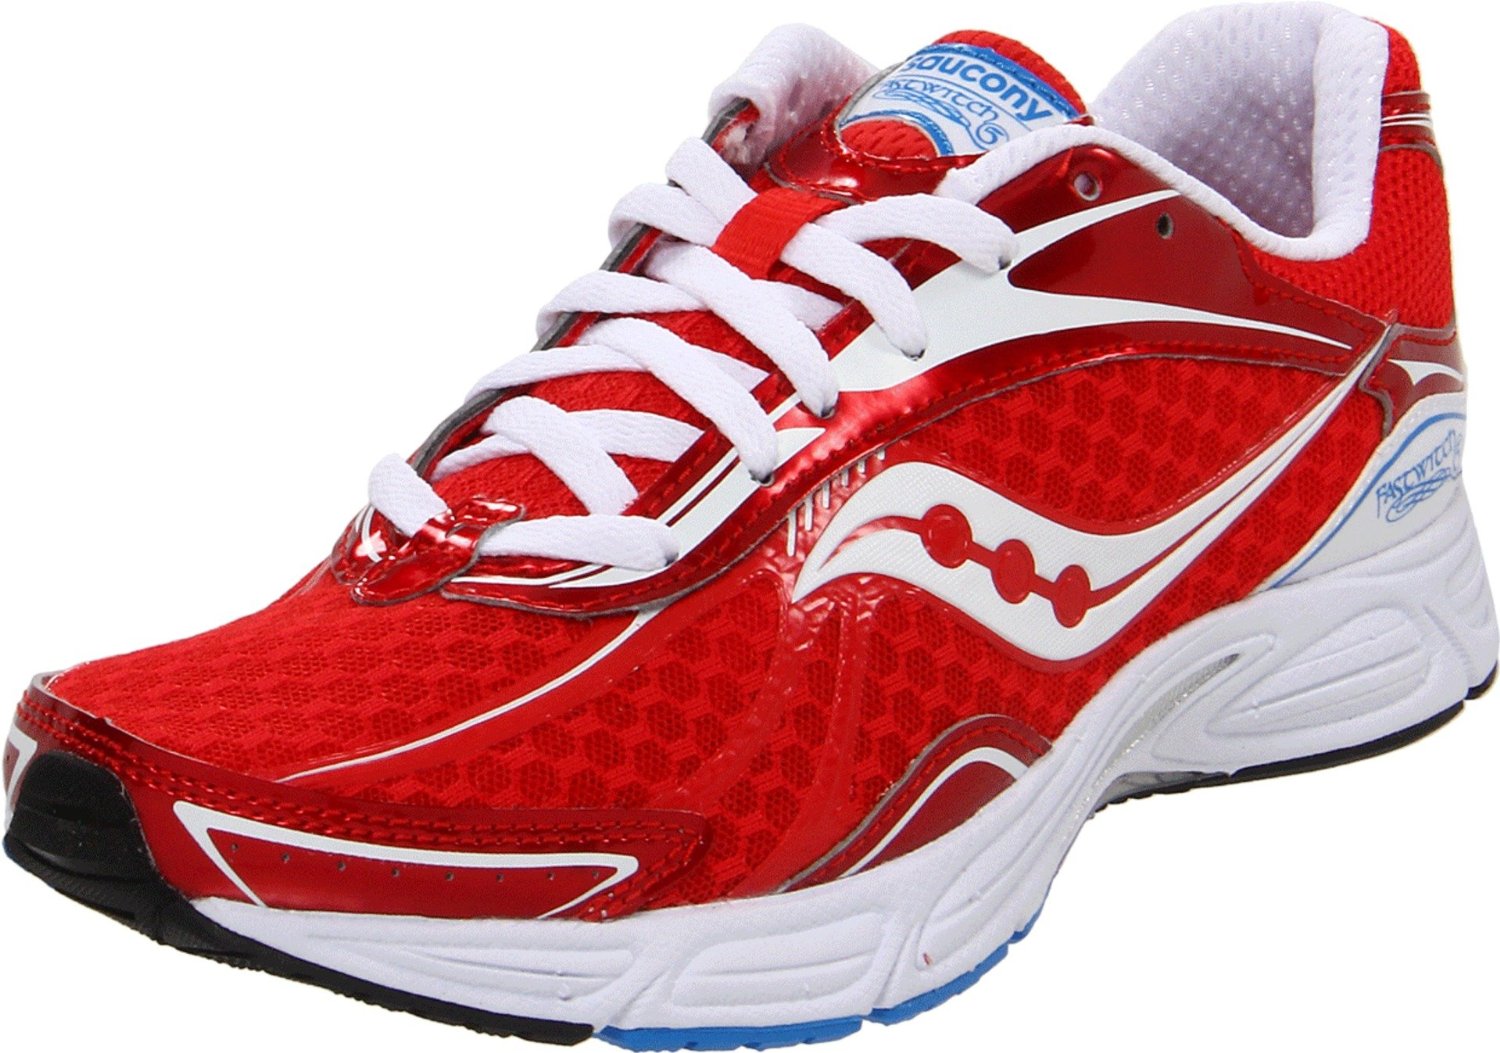 red saucony running shoes